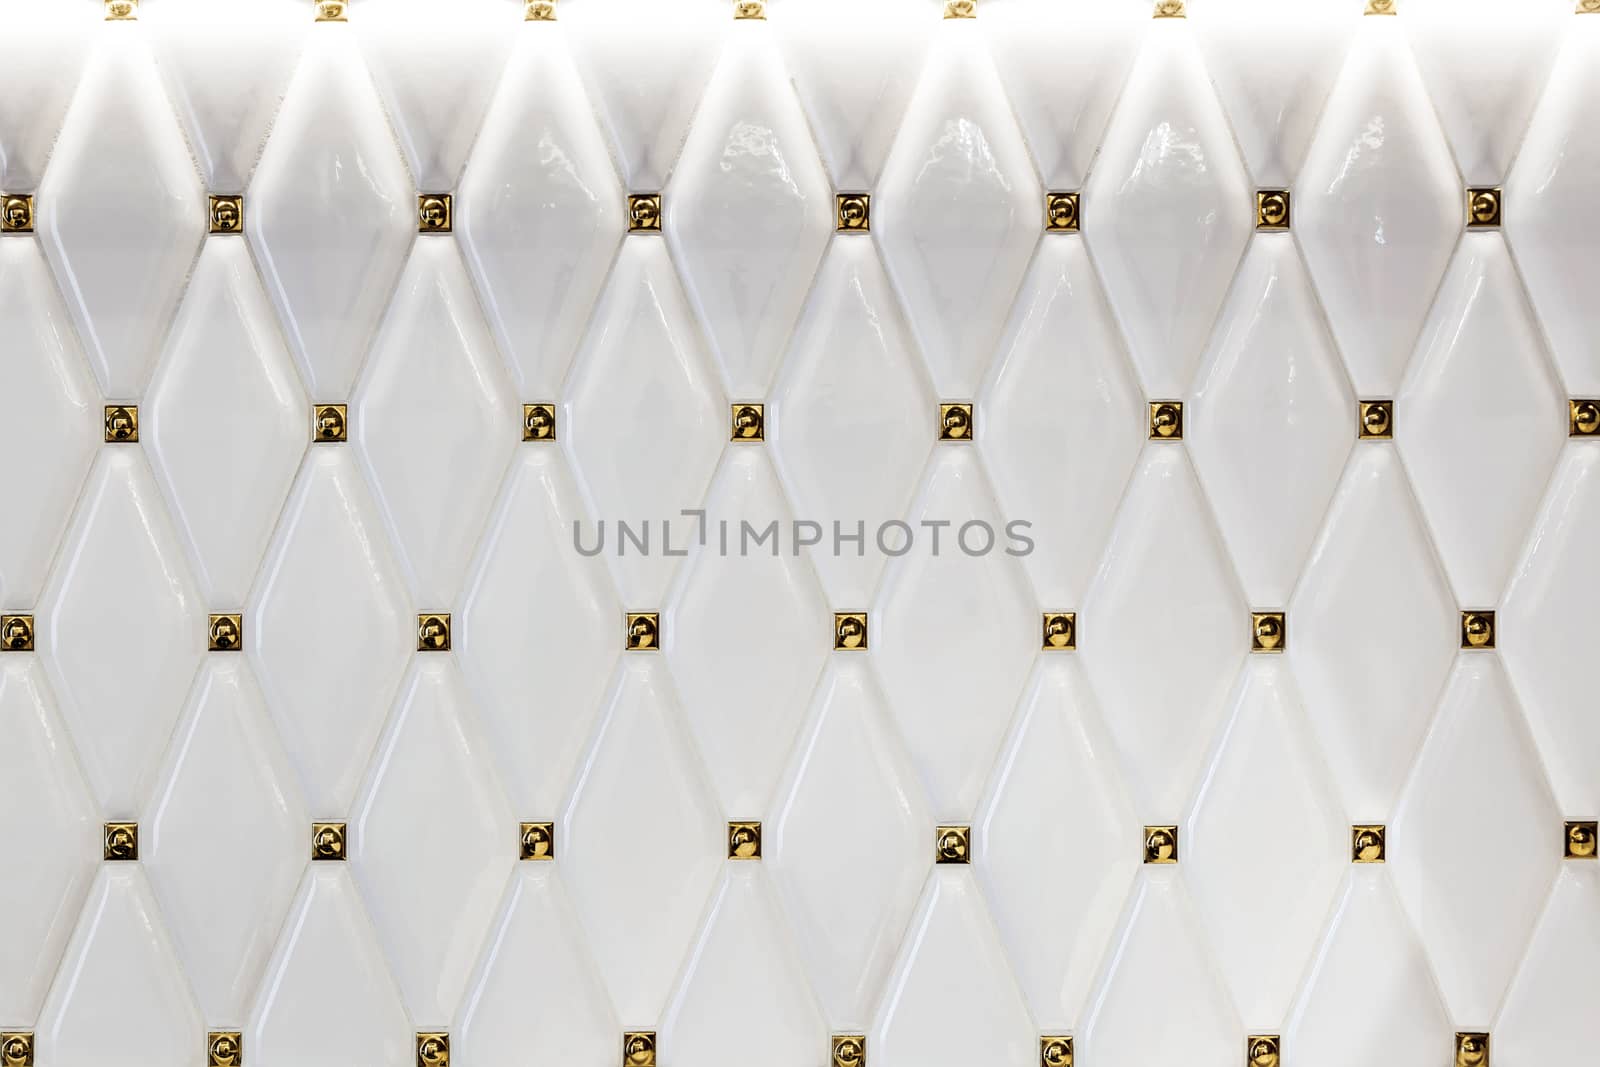 Modern decorative white tile closeup. Decorative background with white tiles on the wall.